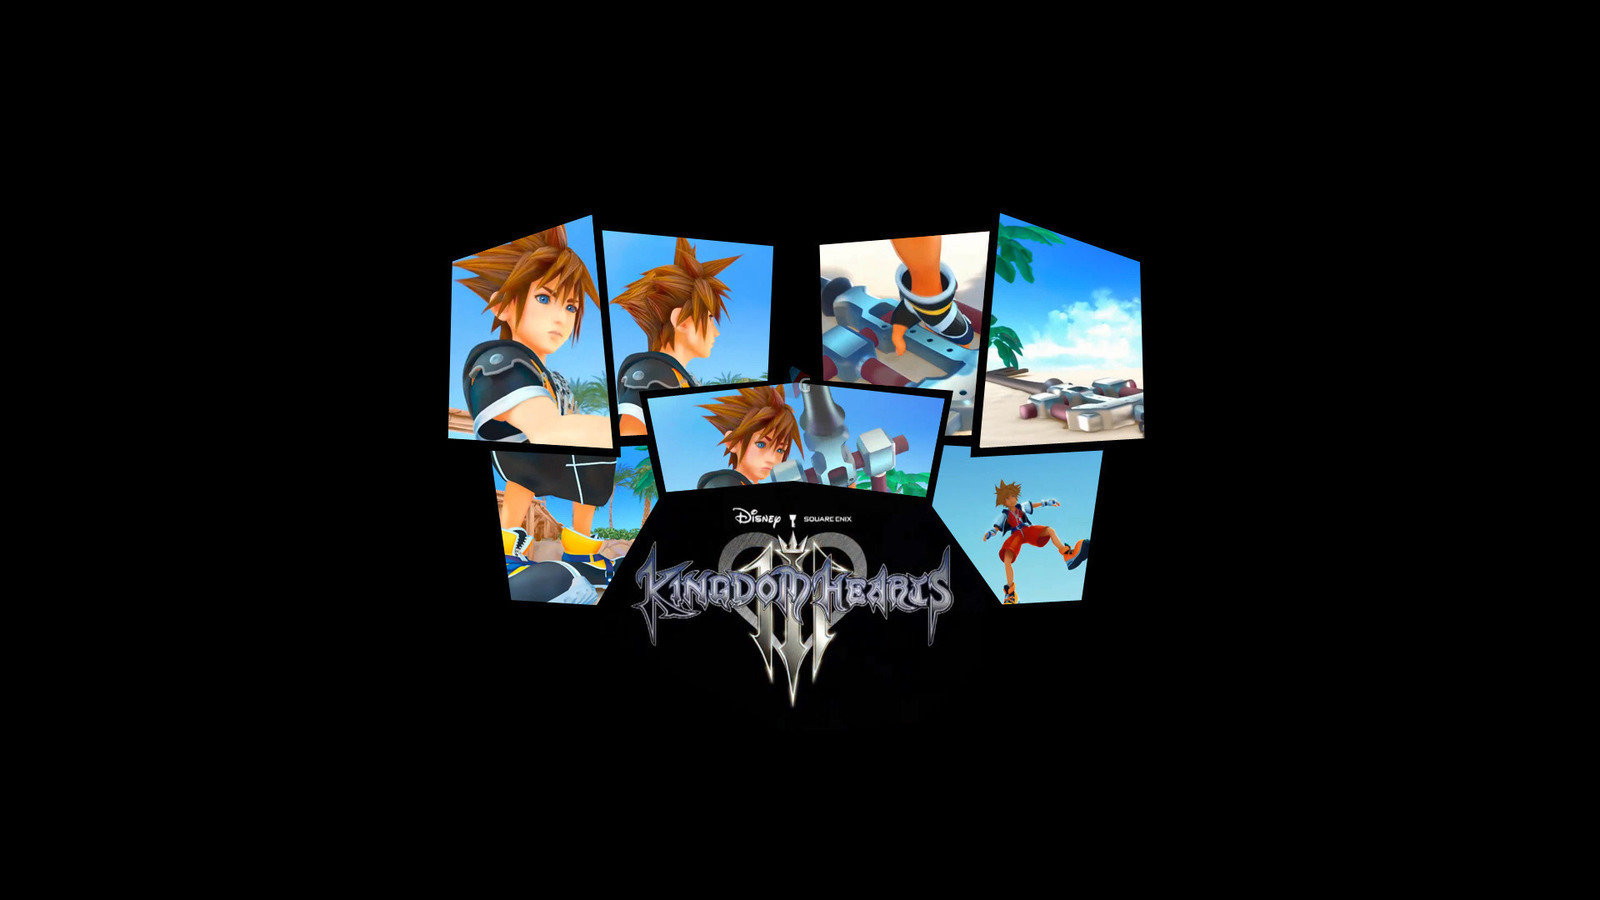 link psn to square enix account